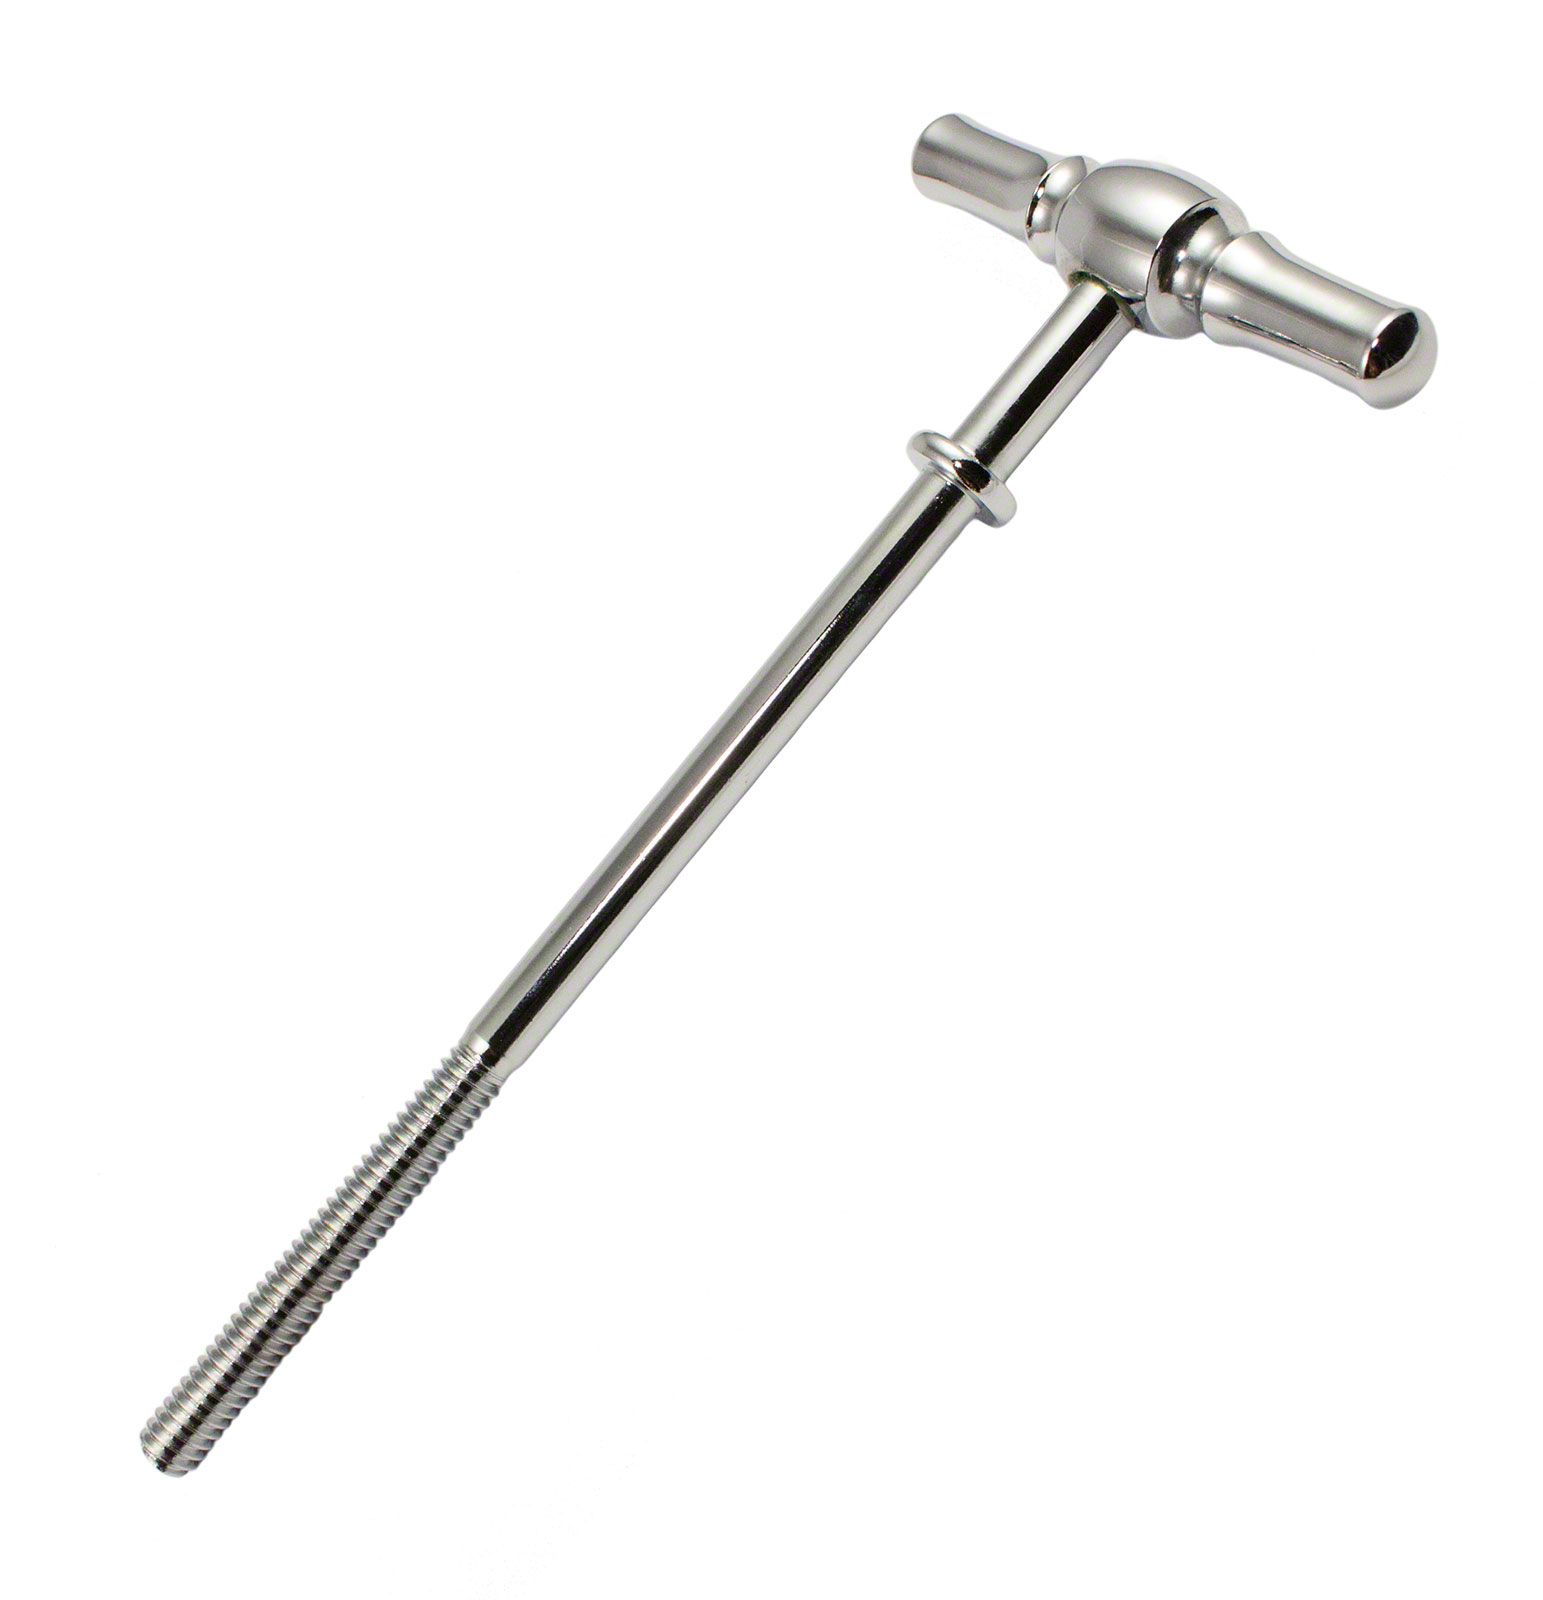 SPAREDRUM TRT2-95 - 95MM T-STYLE BASS DRUM TENSION ROD - 7/32